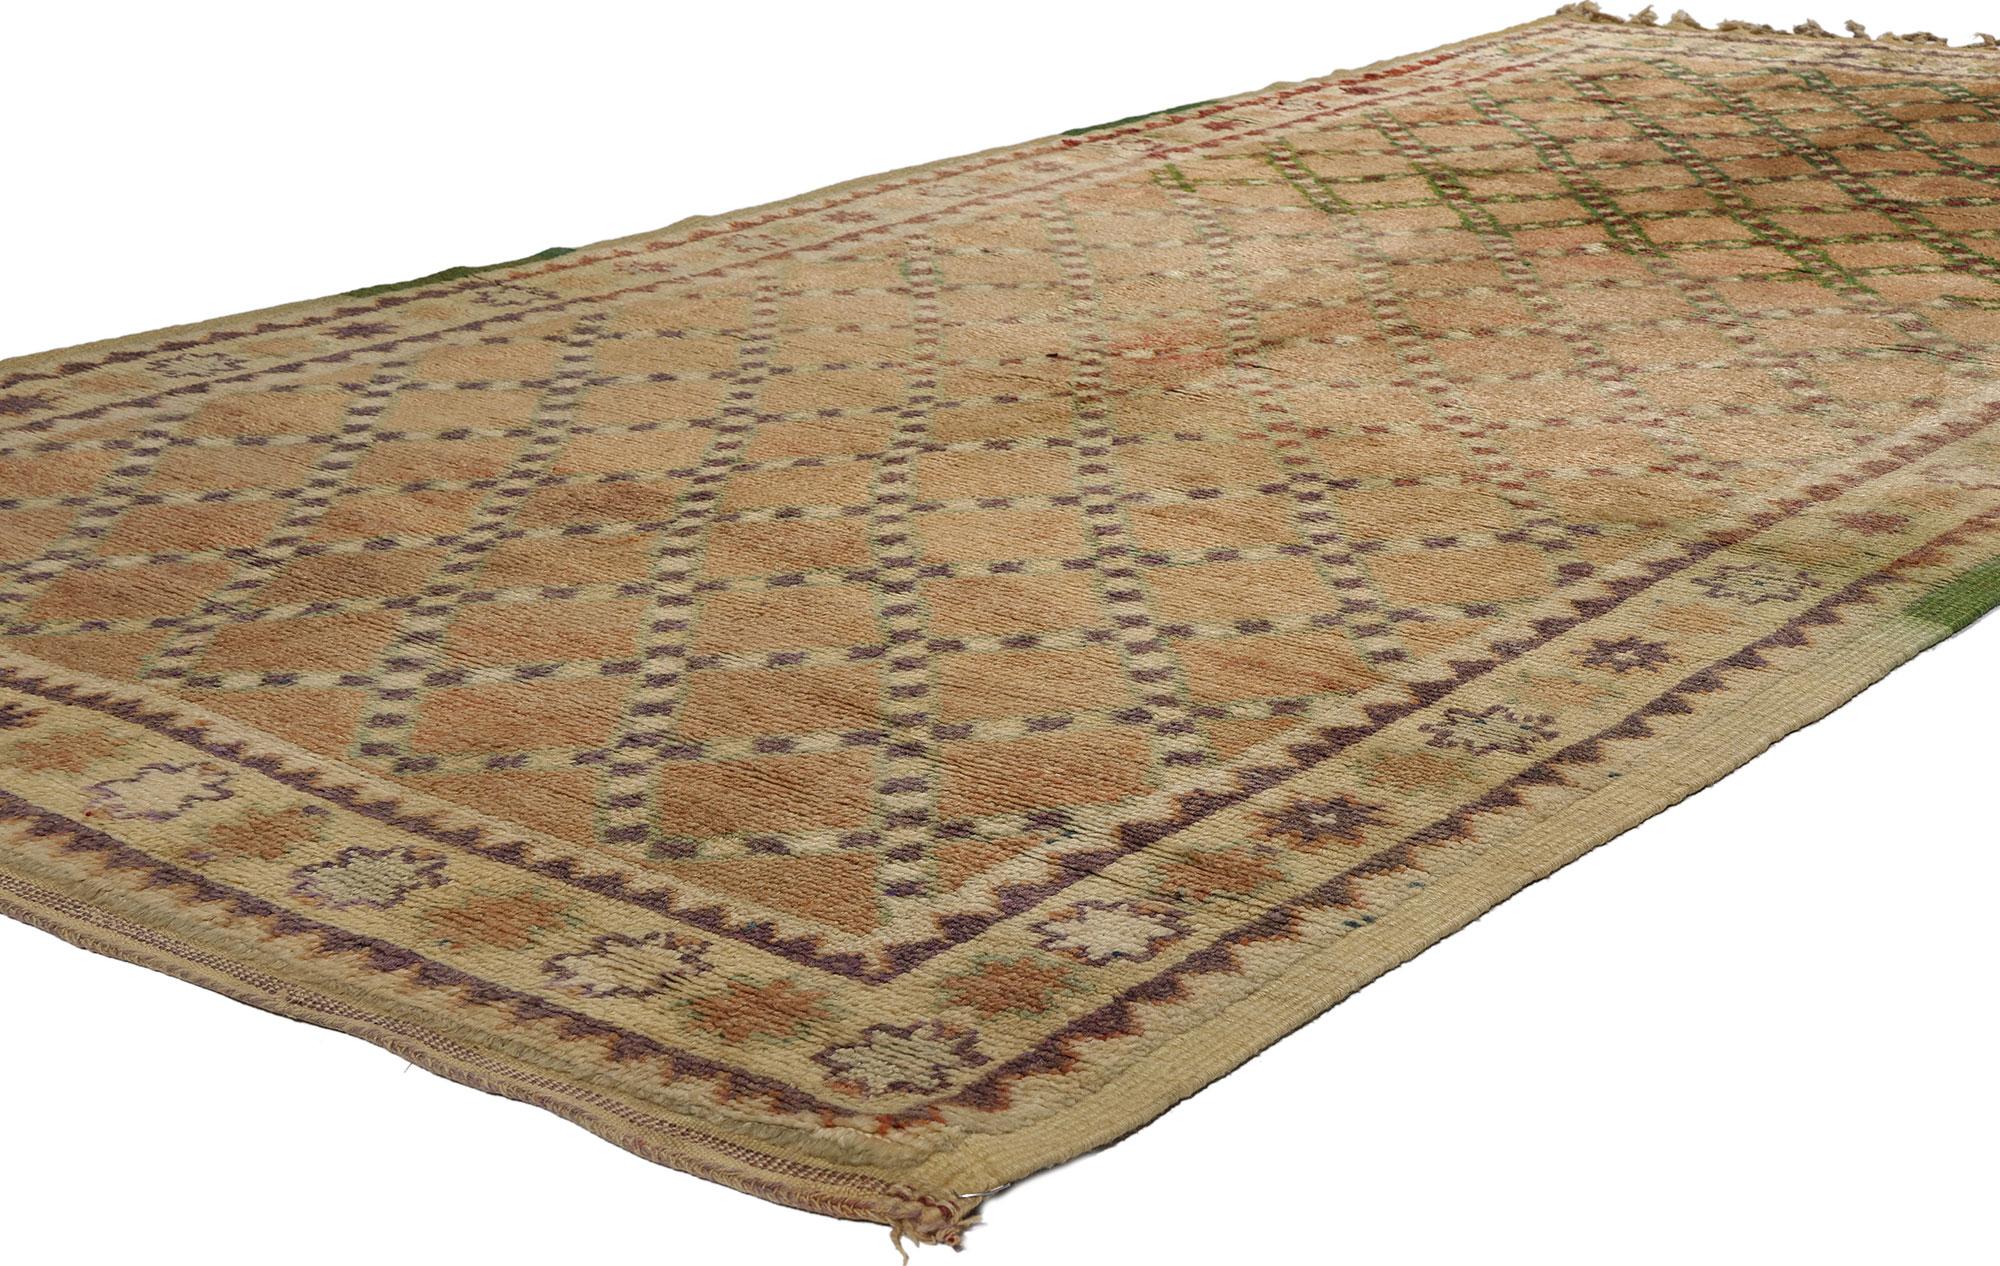 21757 Vintage Brown Taznakht Morooccan Rug, 04'07 x 09'08. Embark on an enchanting journey into the rich legacy of the Taznakht Tribe, where skilled hands in the High Atlas Mountains of southern Morocco meticulously crafted this hand-knotted wool